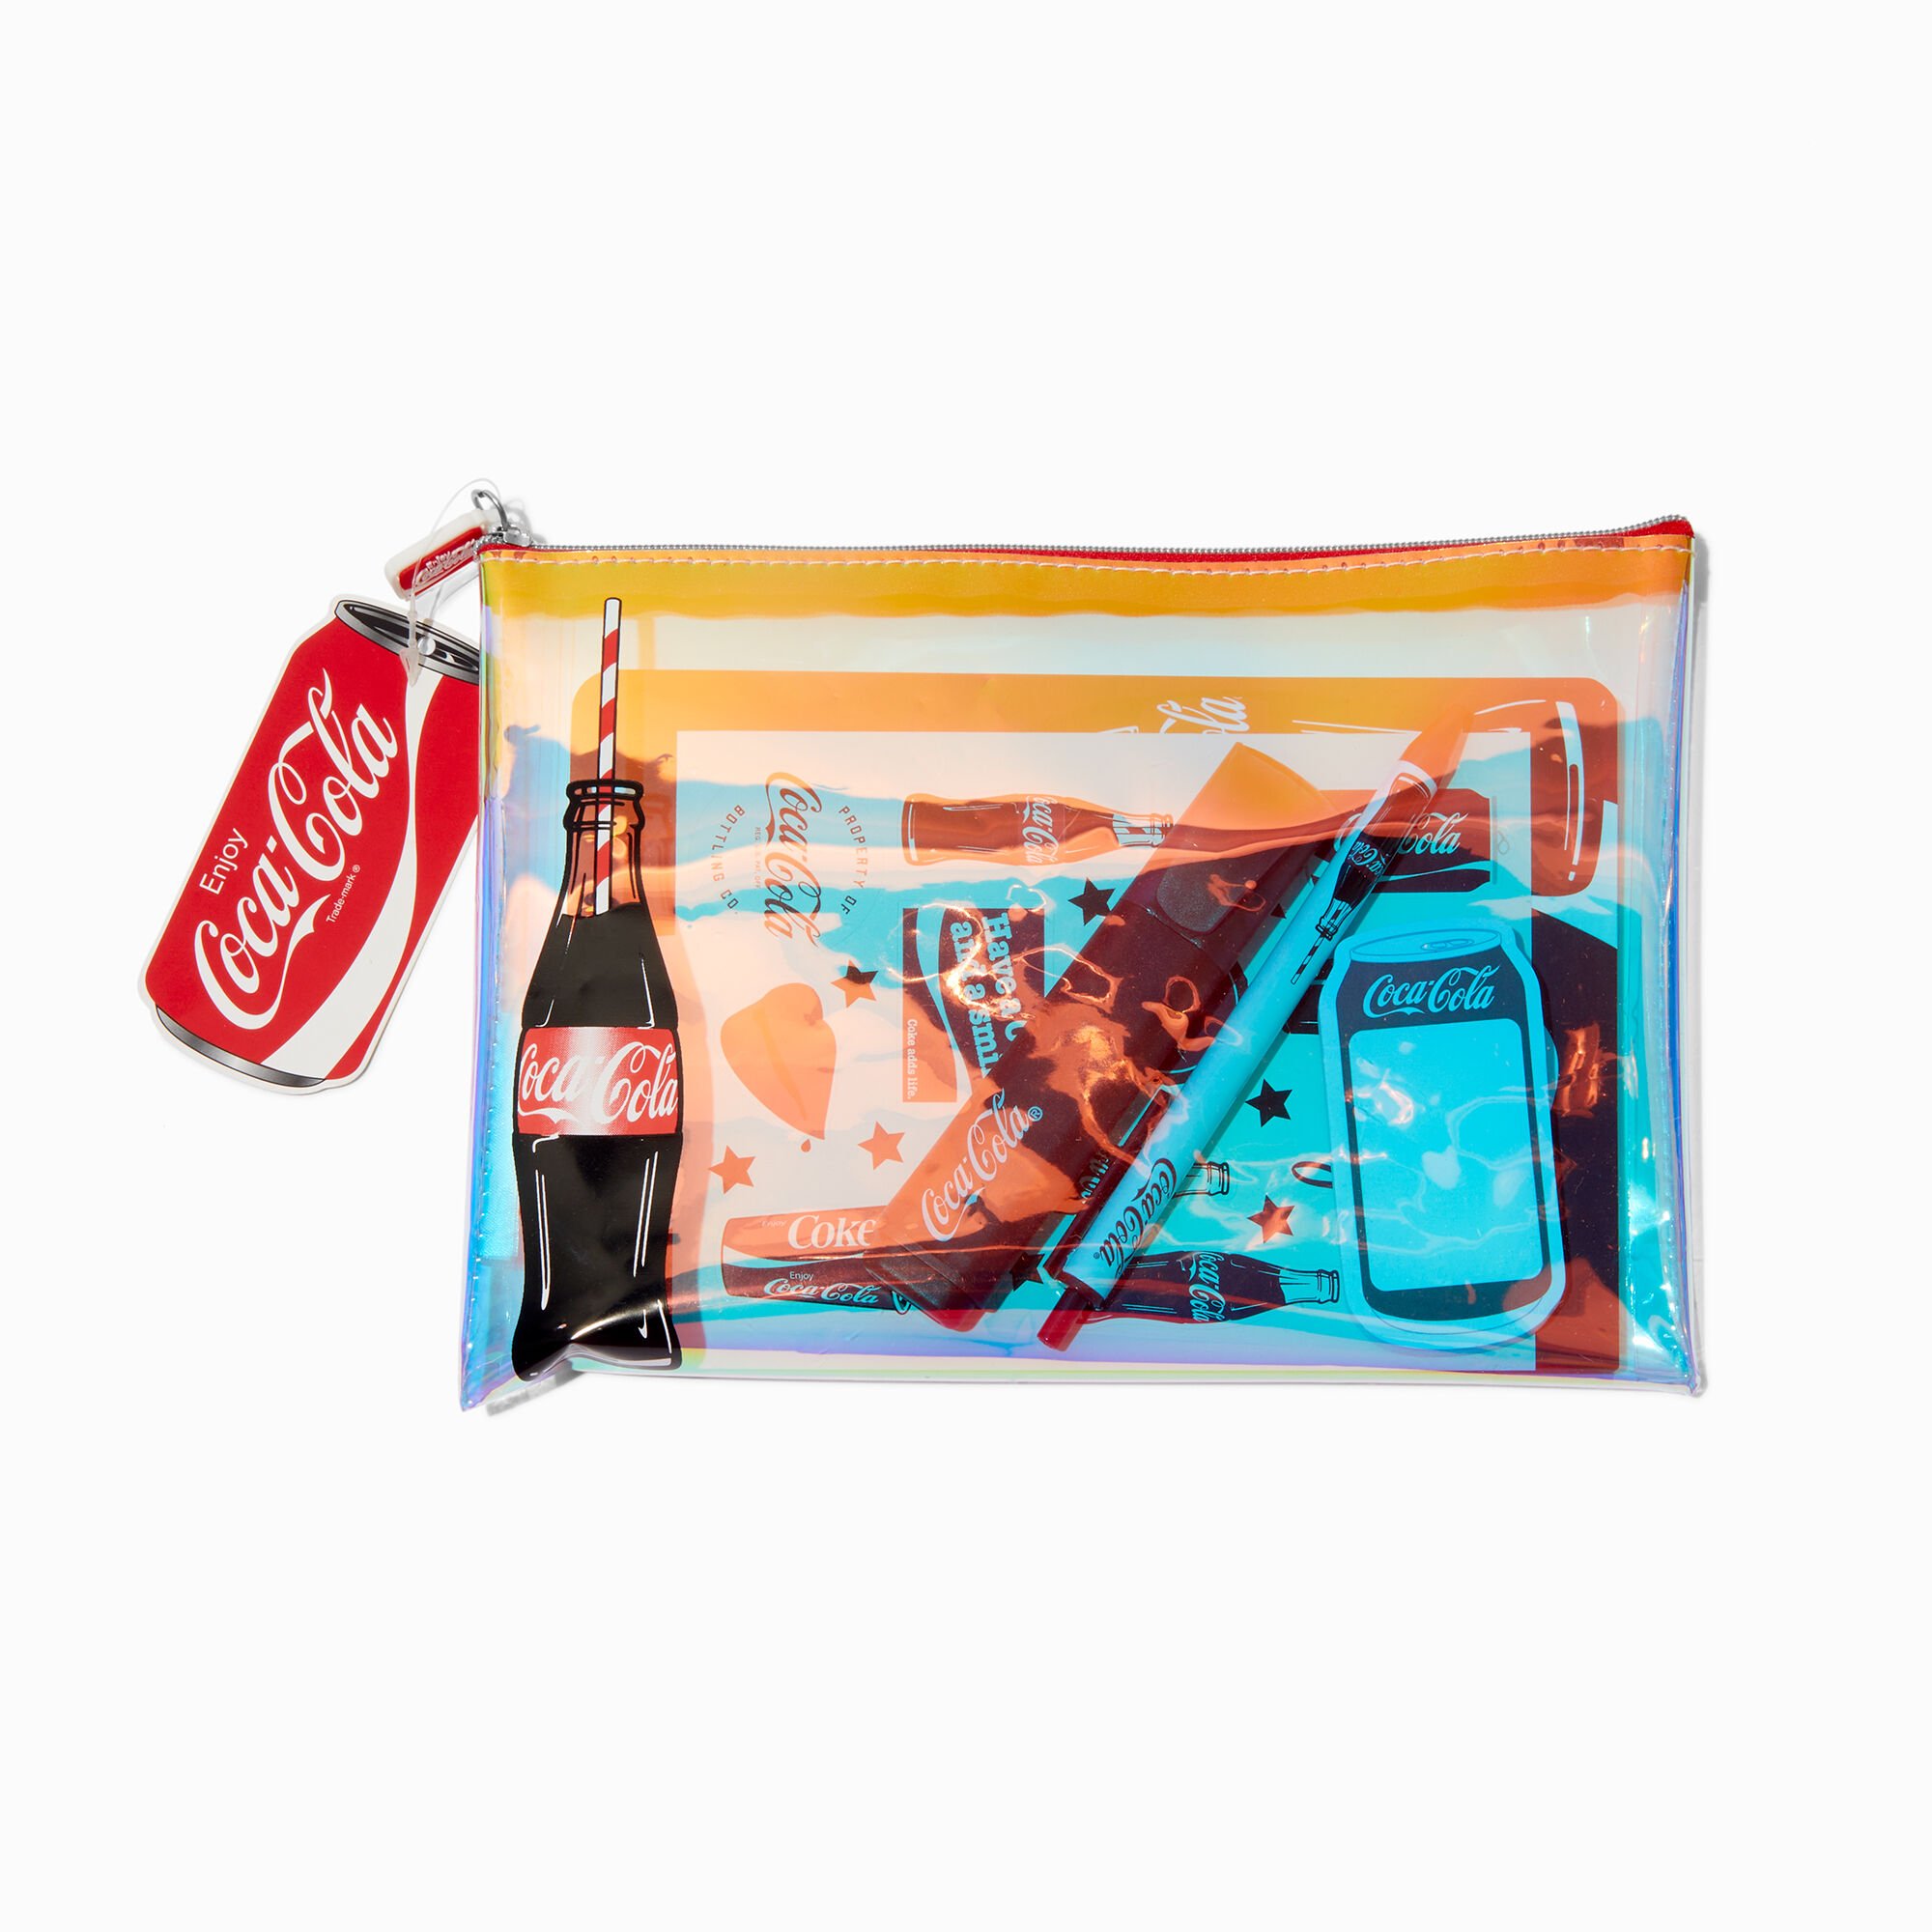 View Claires CocaCola Stationery Set information